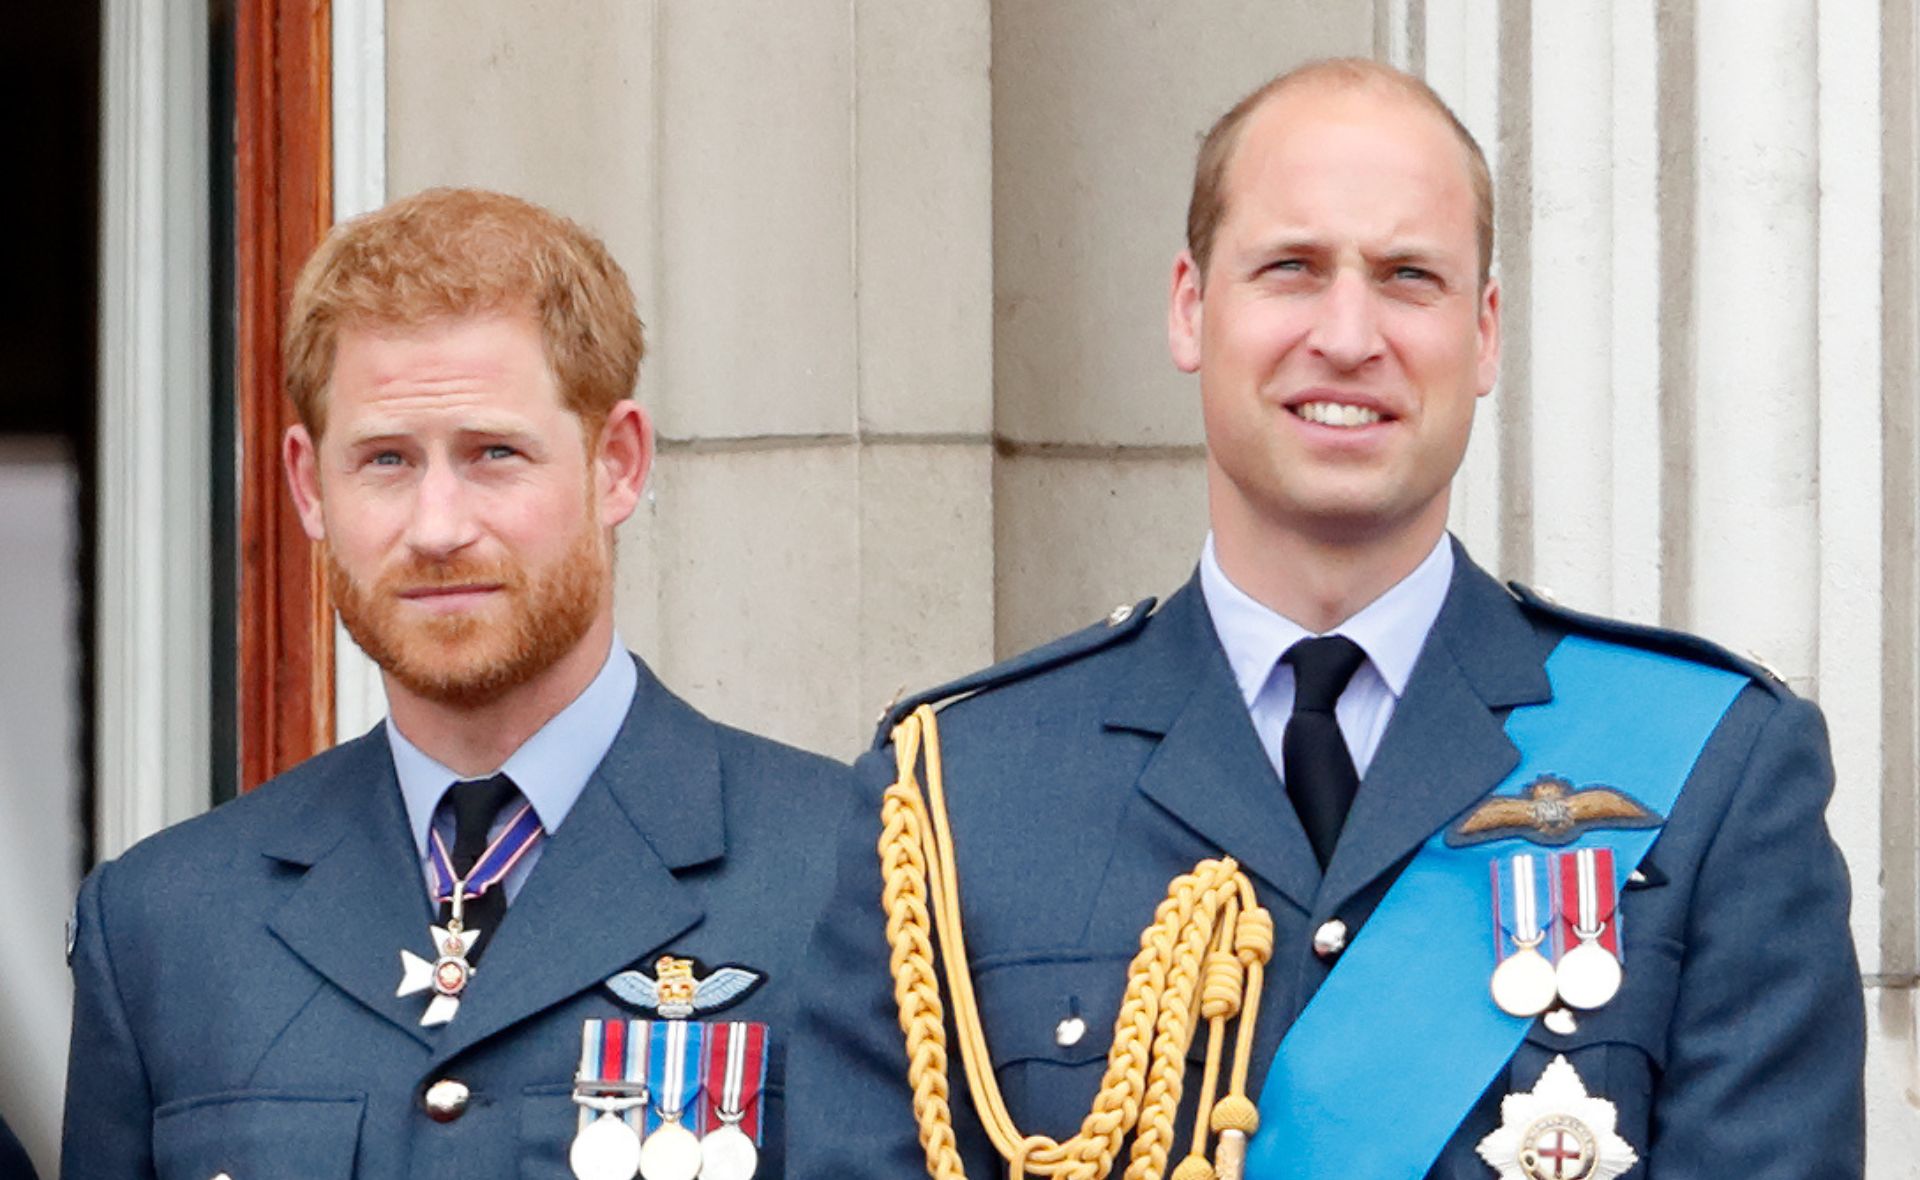 The princely brothers William and Harry have reignited their feud after a cease fire to mourn